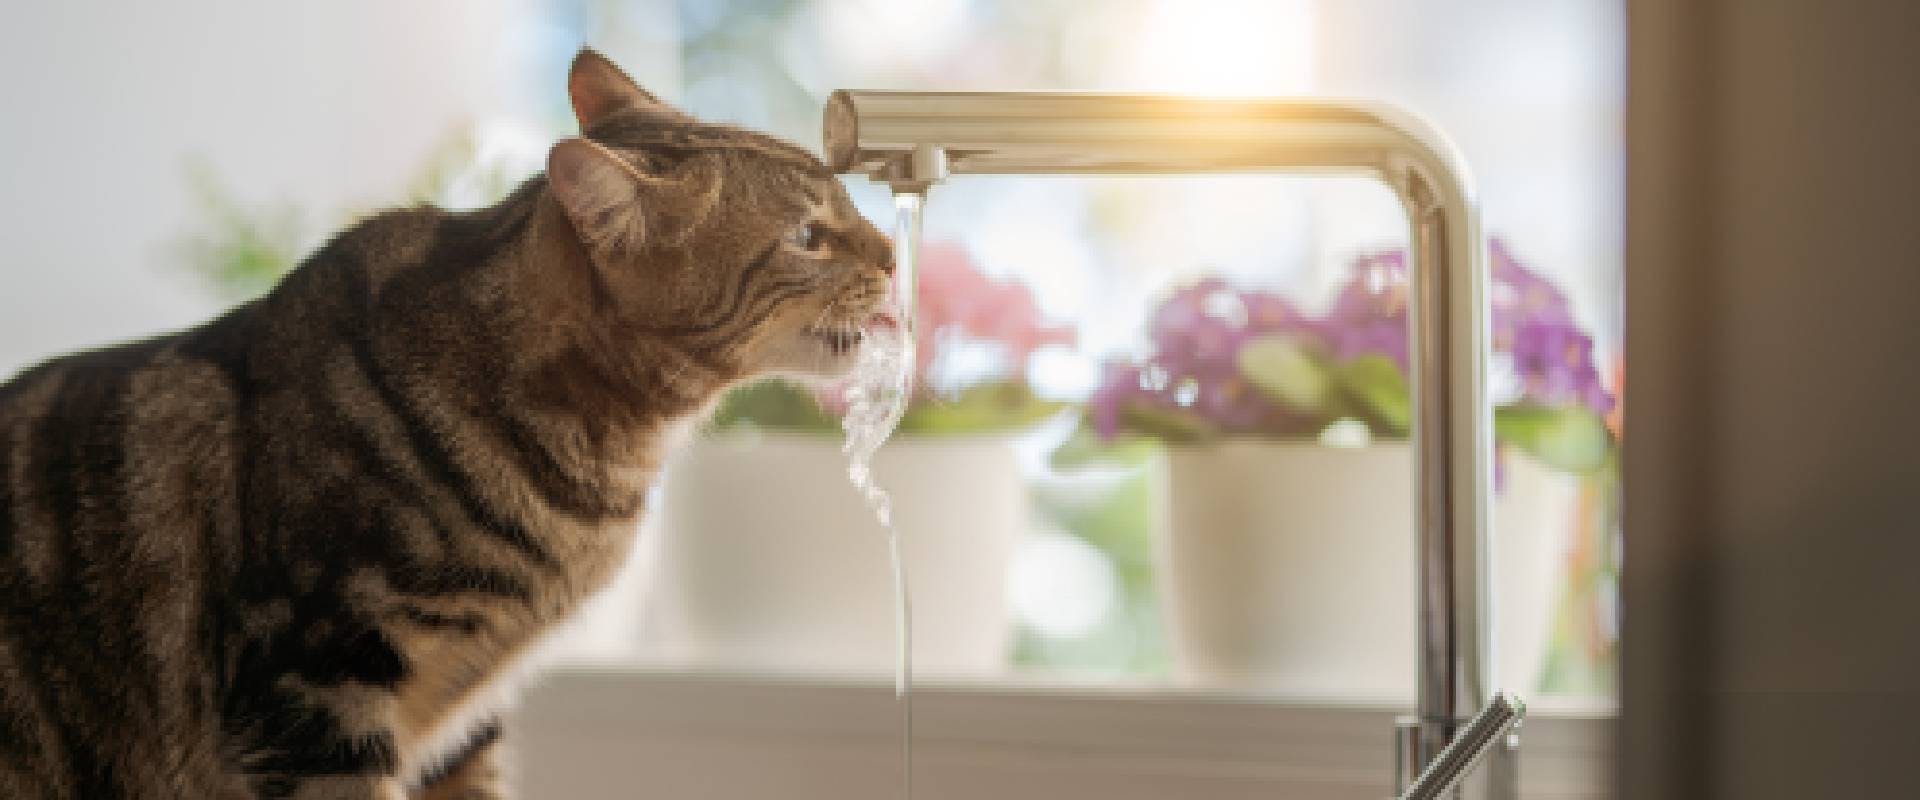 Cat drinking from tap